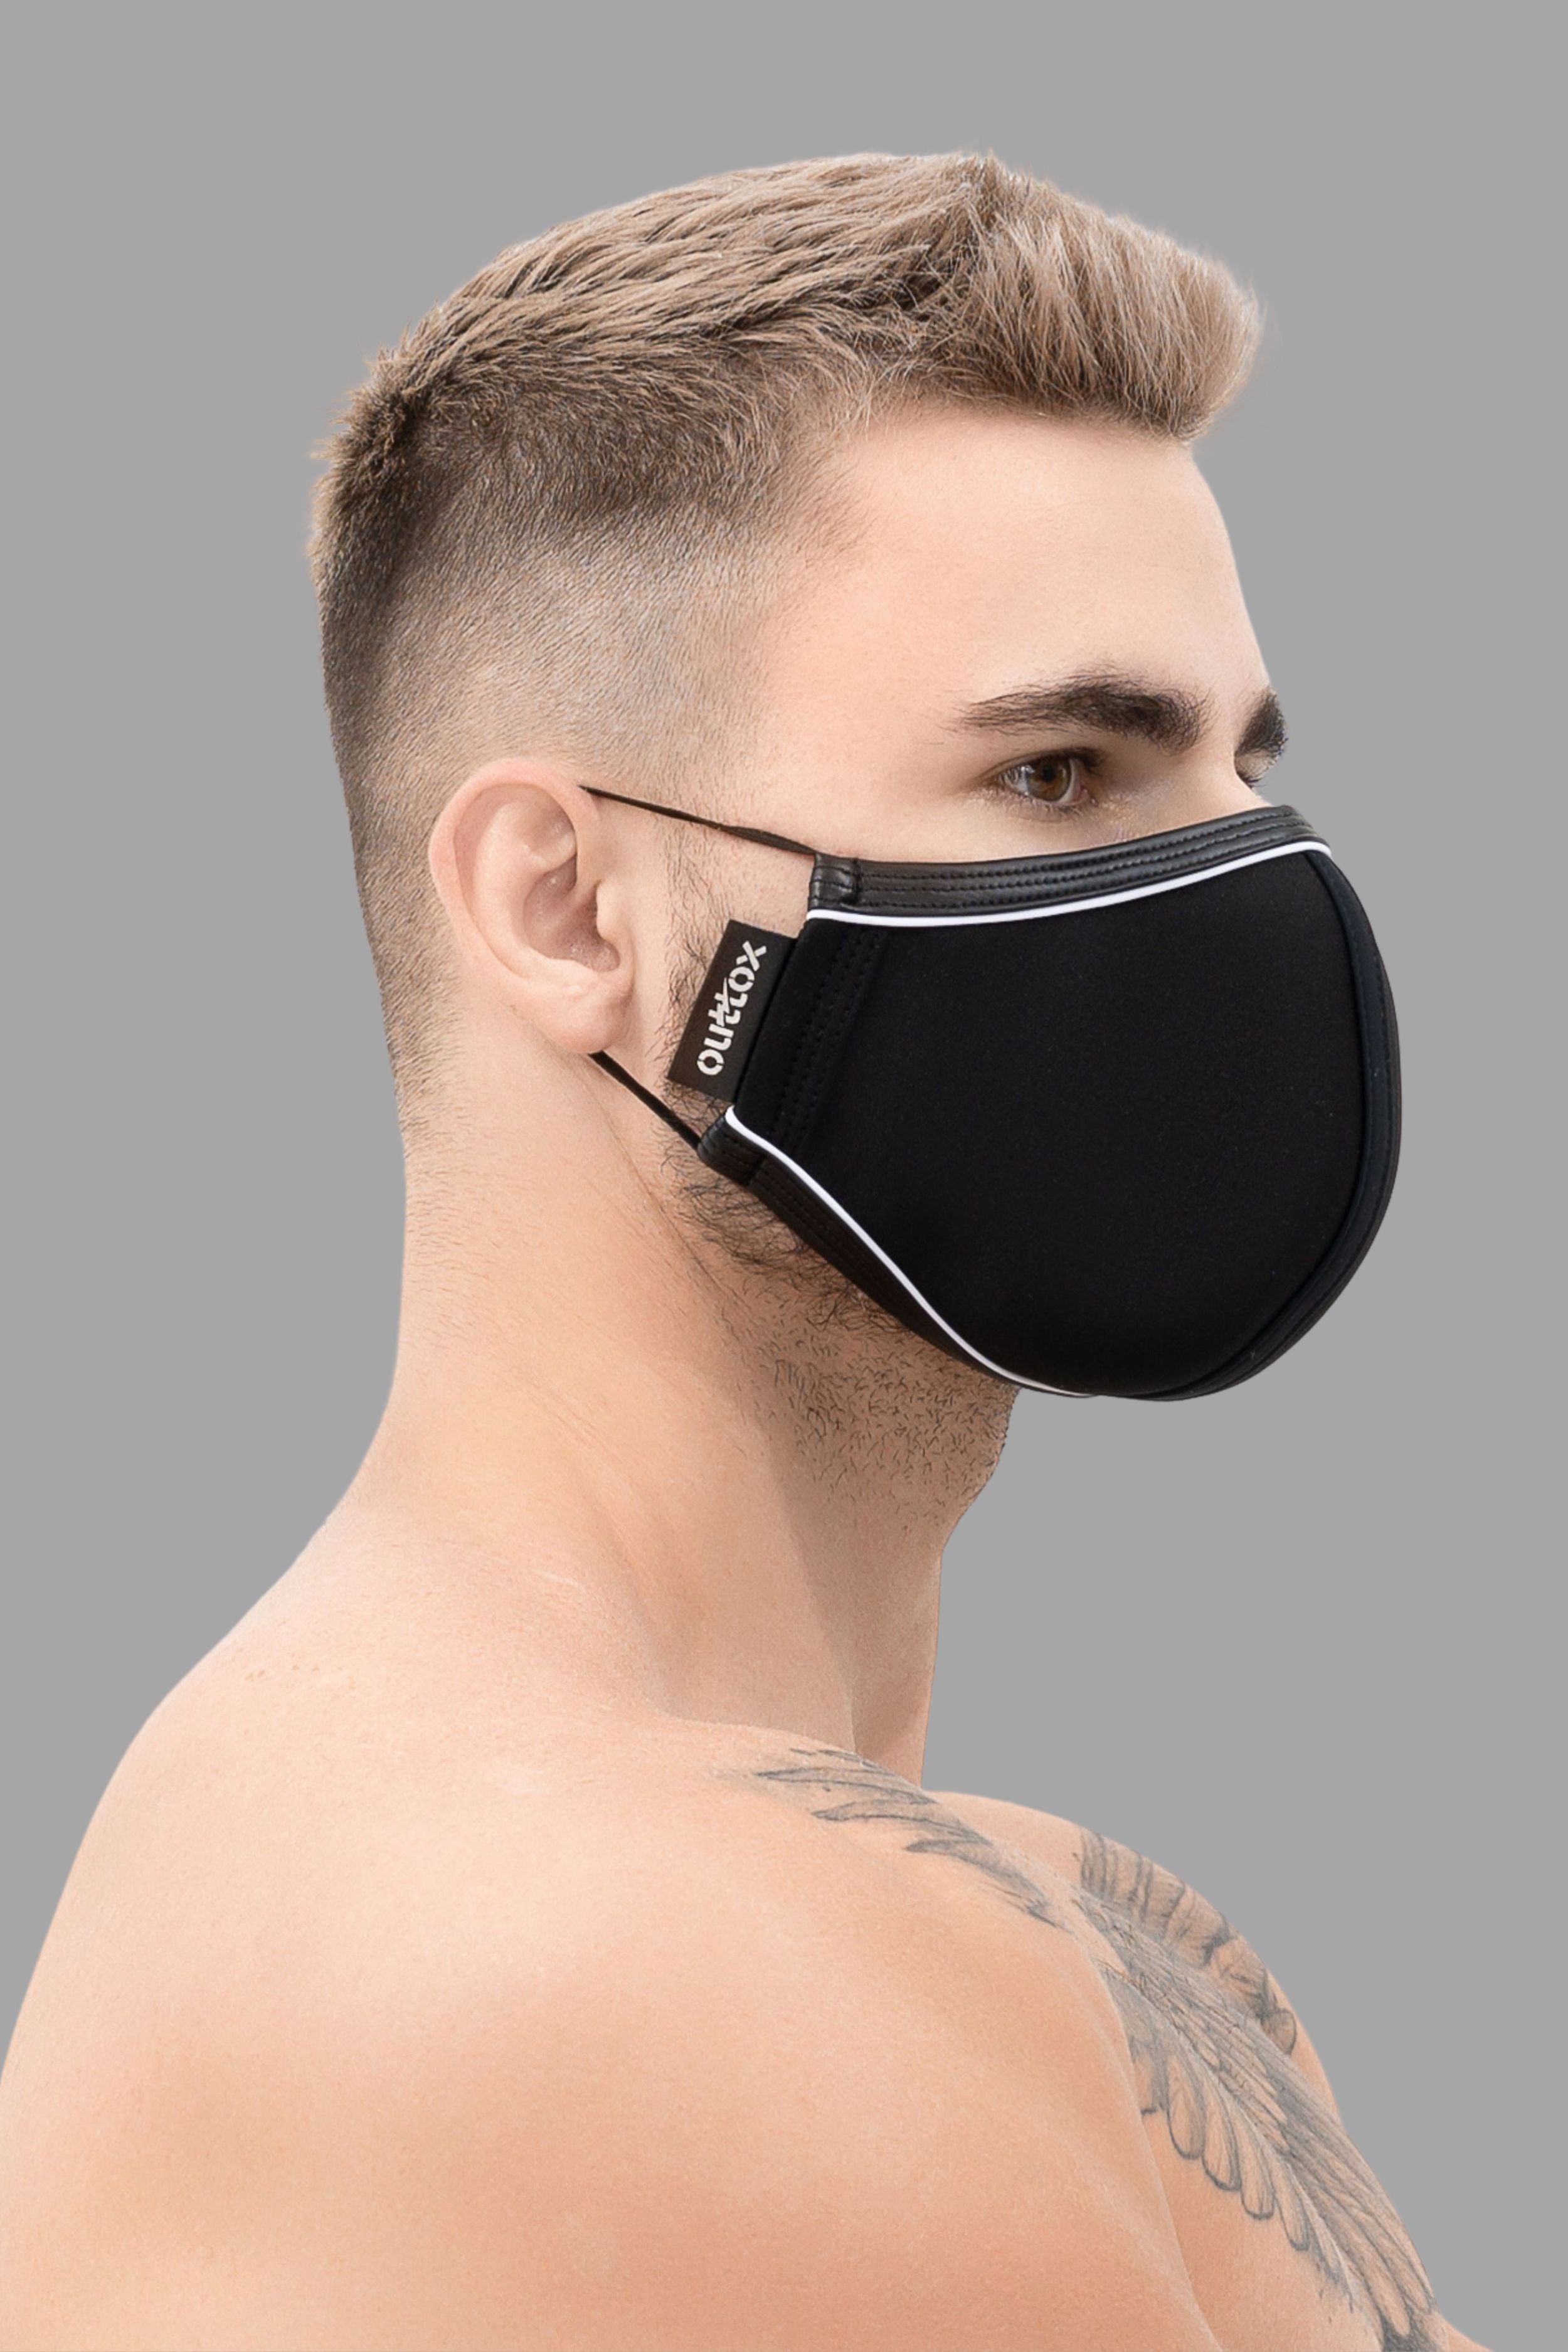 Outtox. Everyday Mask. Black+White